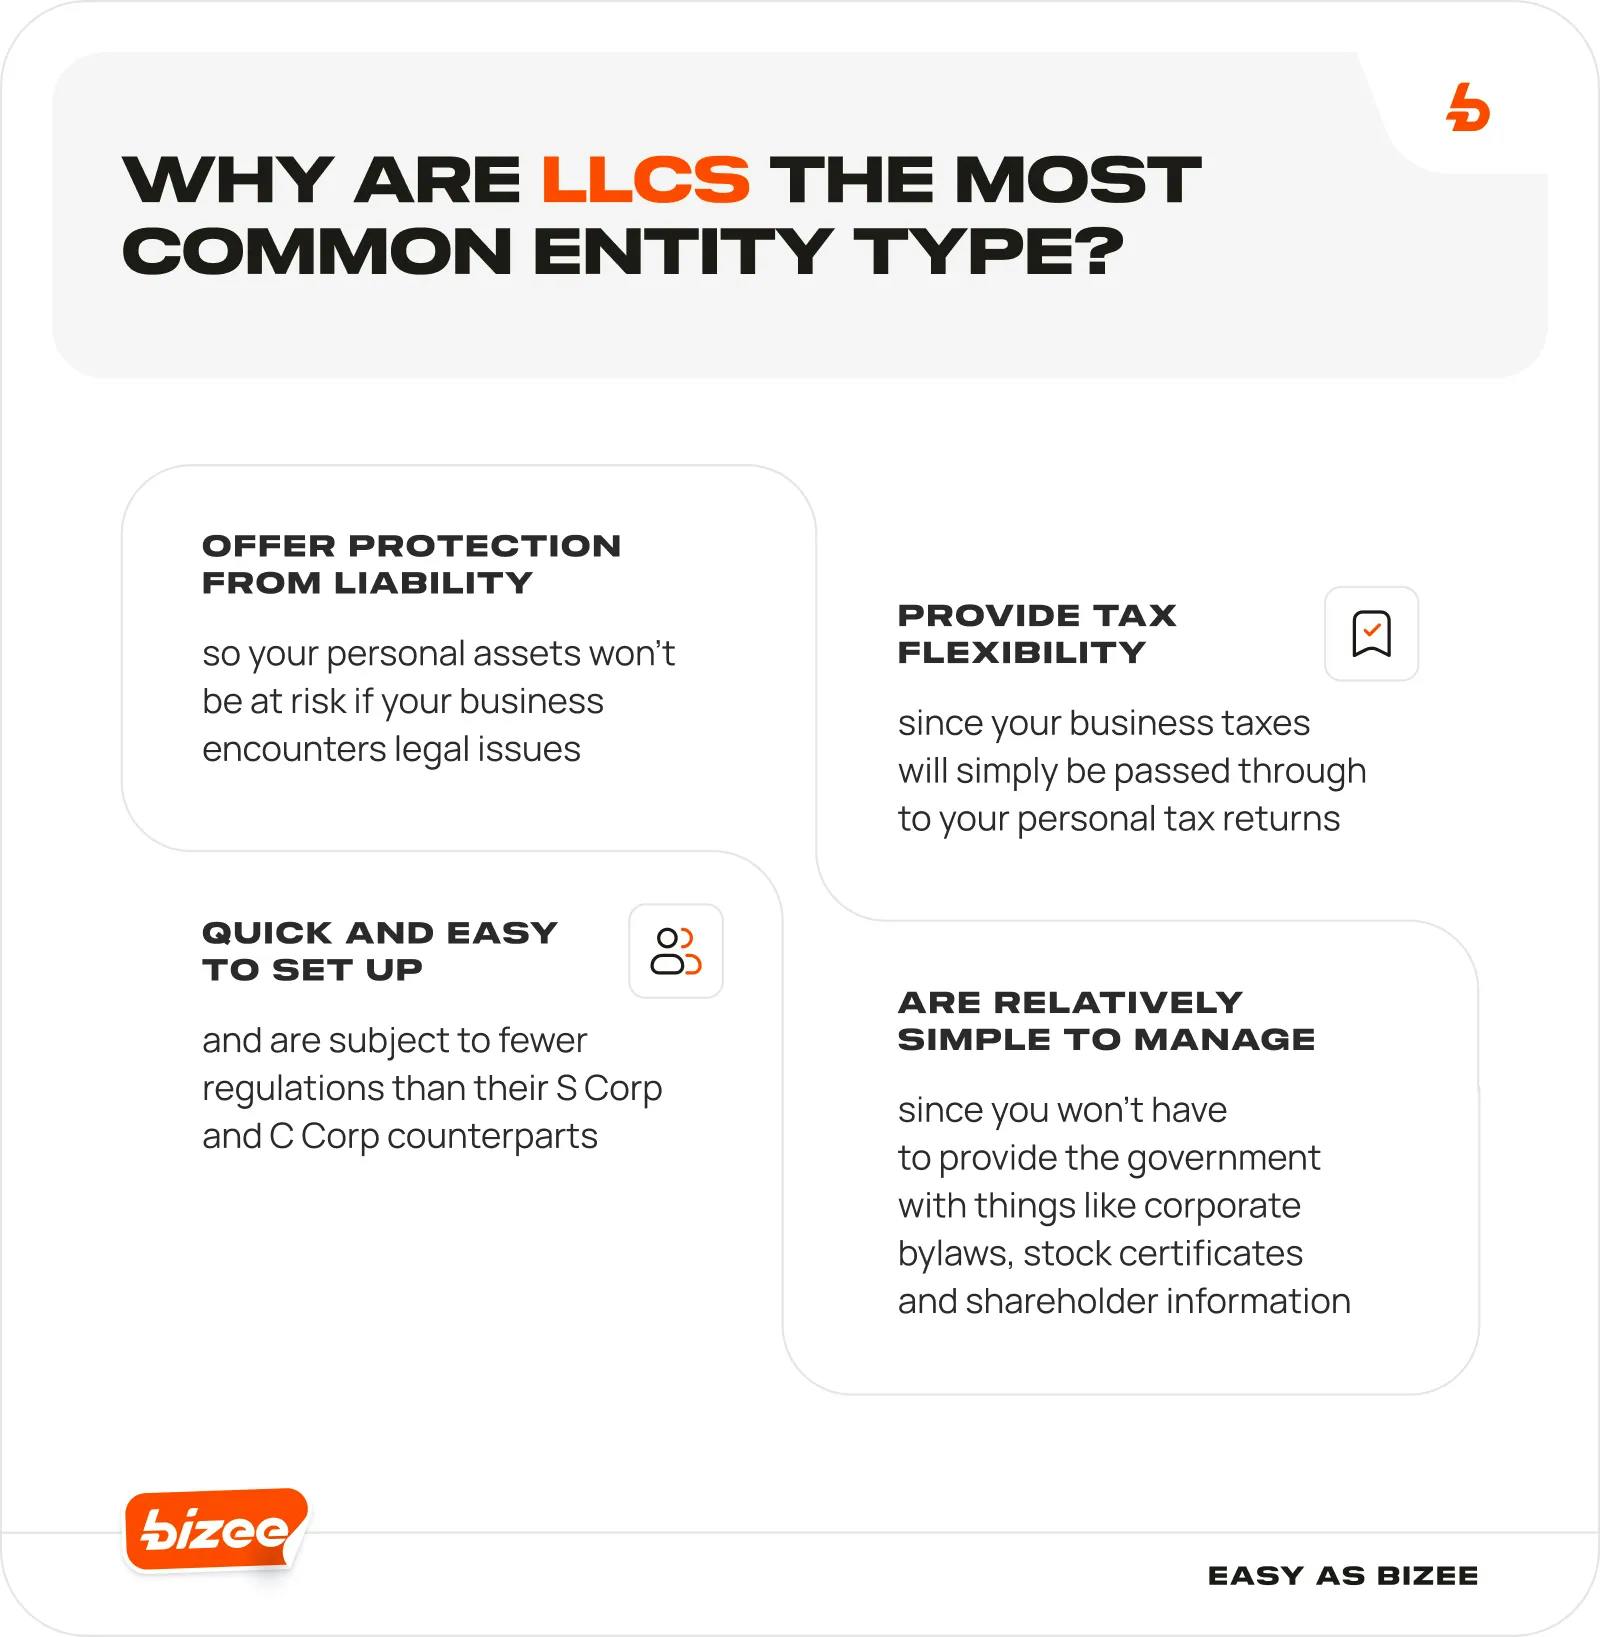 Why Are LLCs the Most Common Entity Type